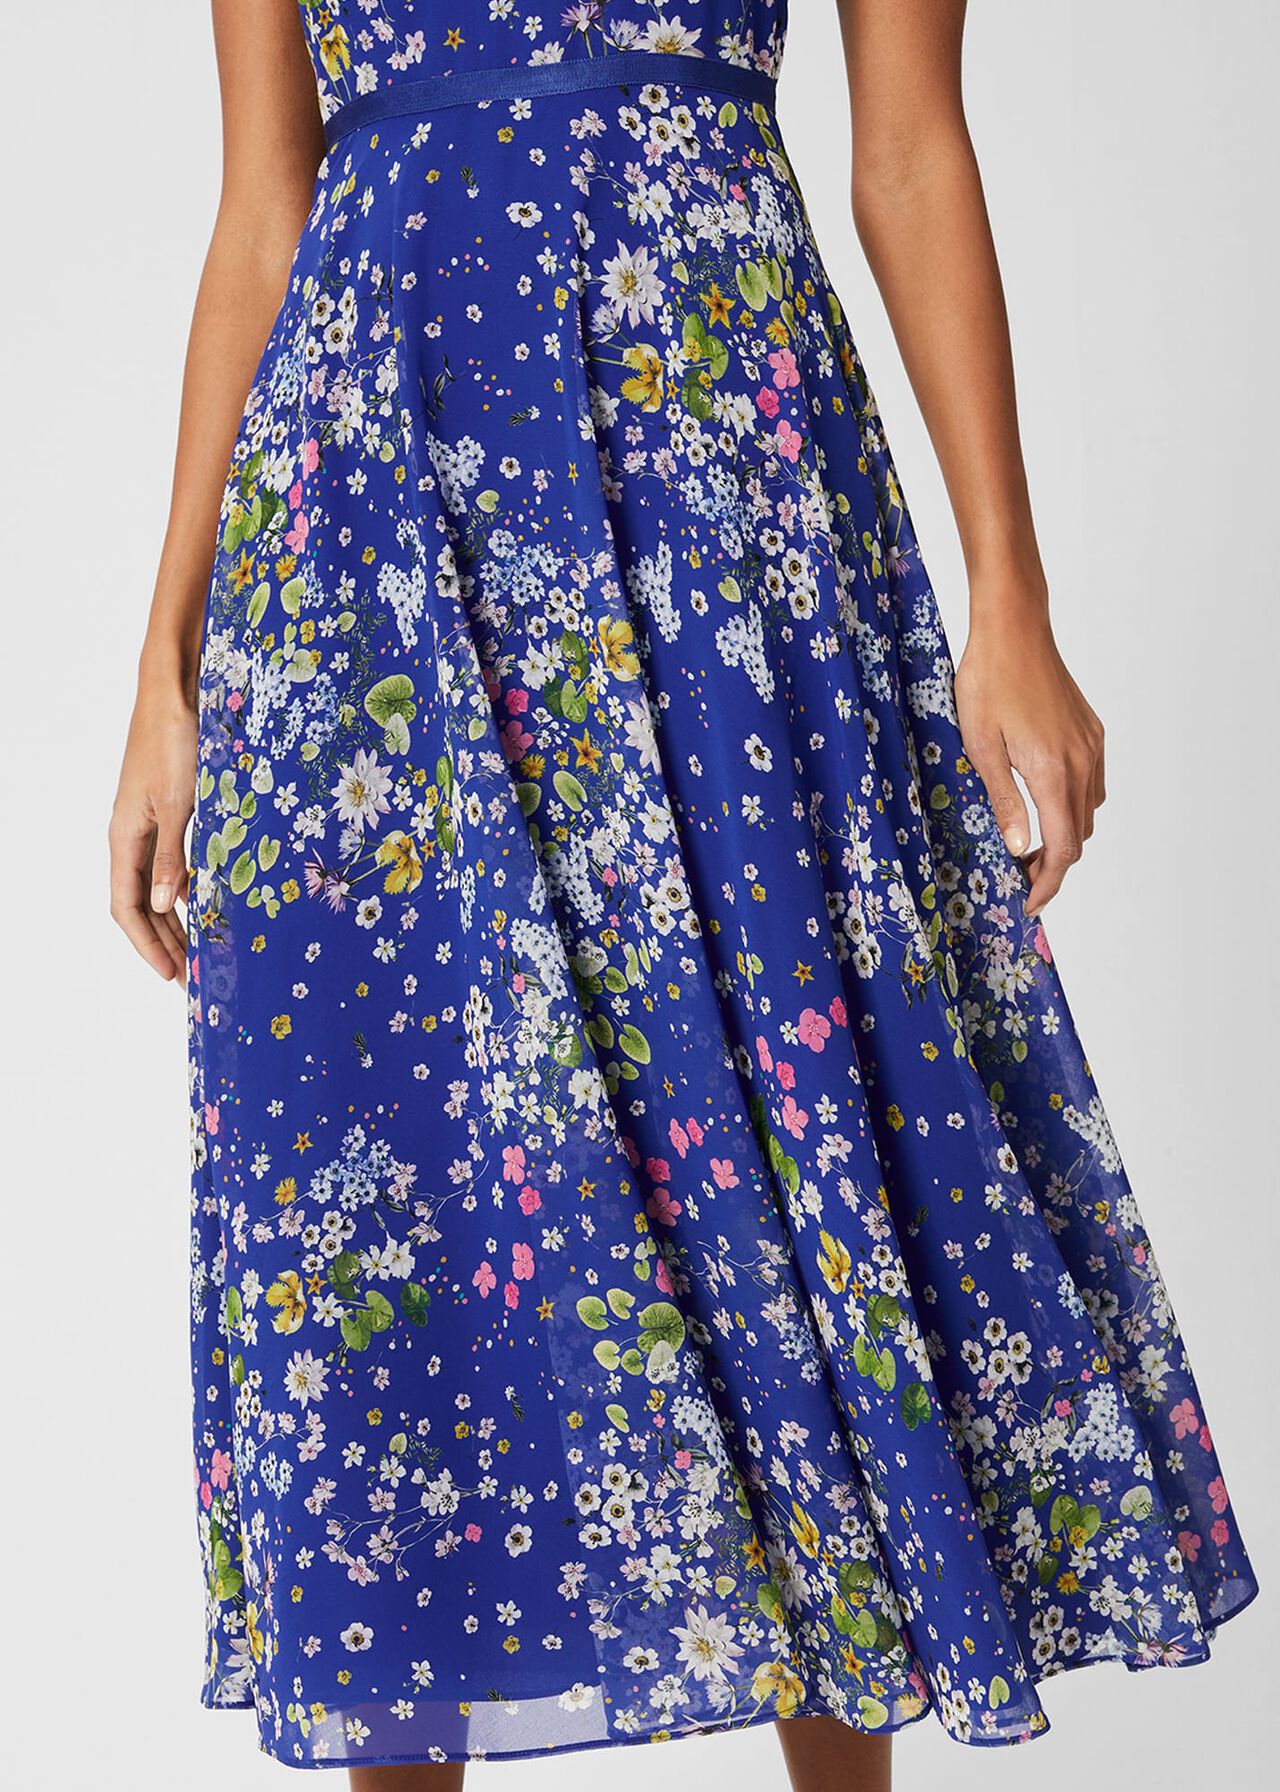 Carly Floral Fit And Flare Dress, Cobalt Multi, hi-res